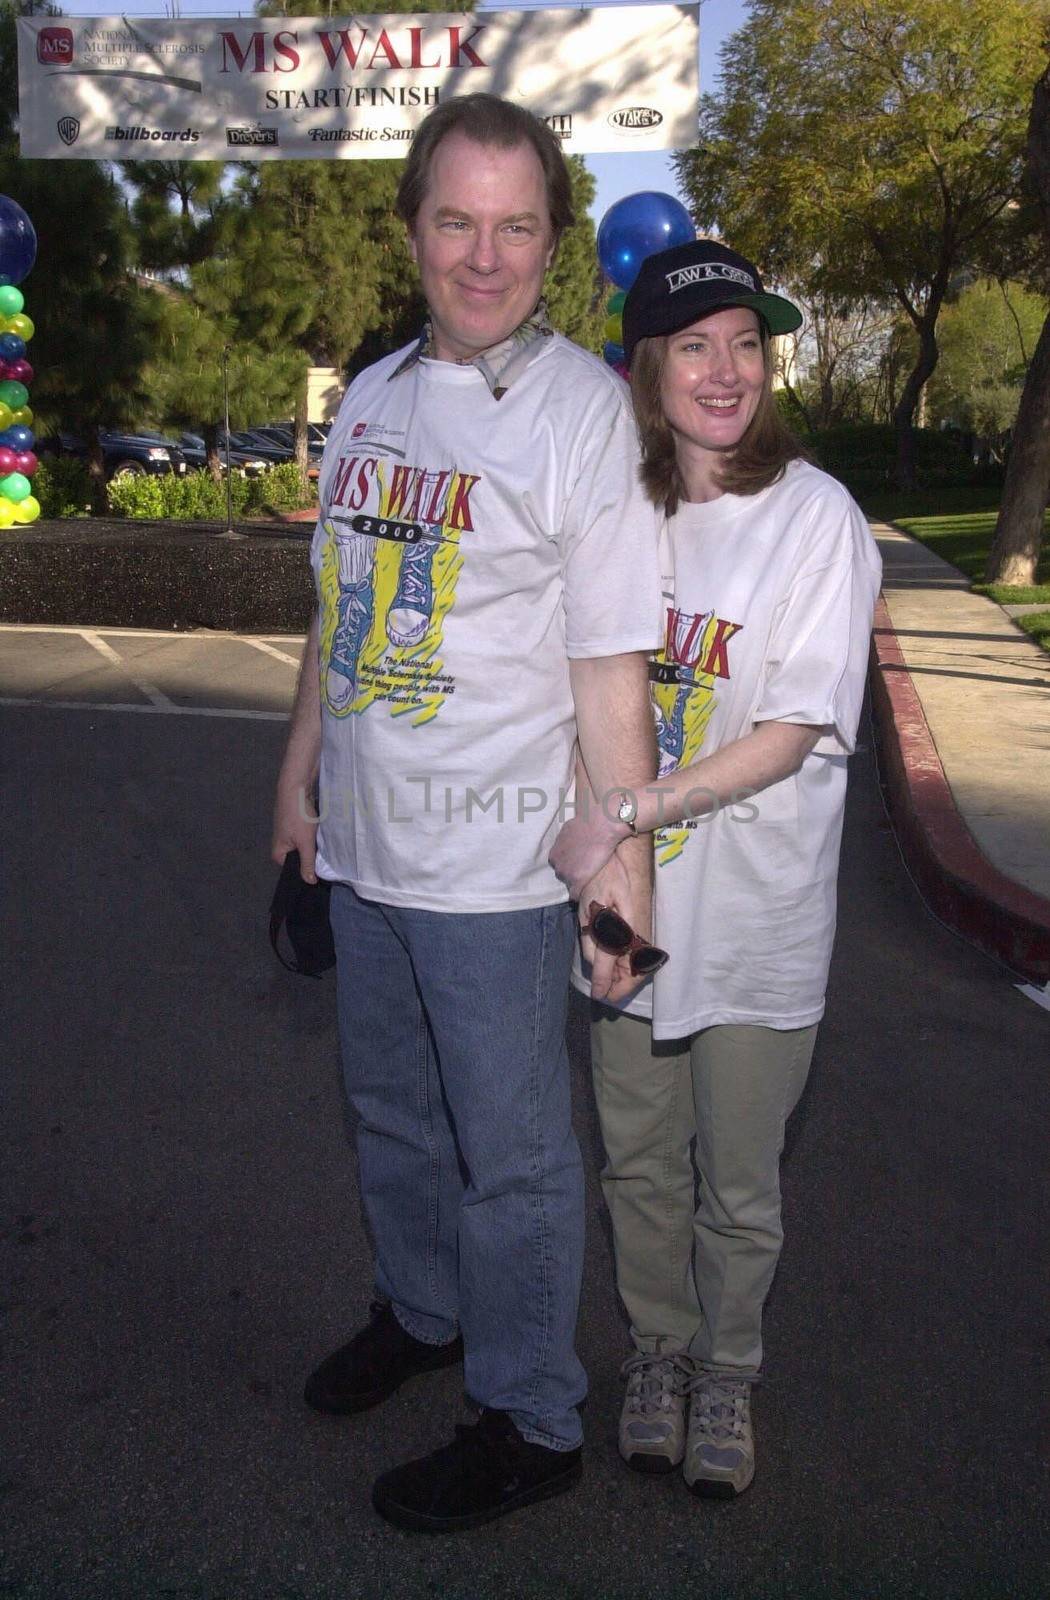 Michael Nickean and Annette O'Toole at the MS Walk 2000, where the cast of "Laverne and Shirley" reunited. Burbank, 04-09-00